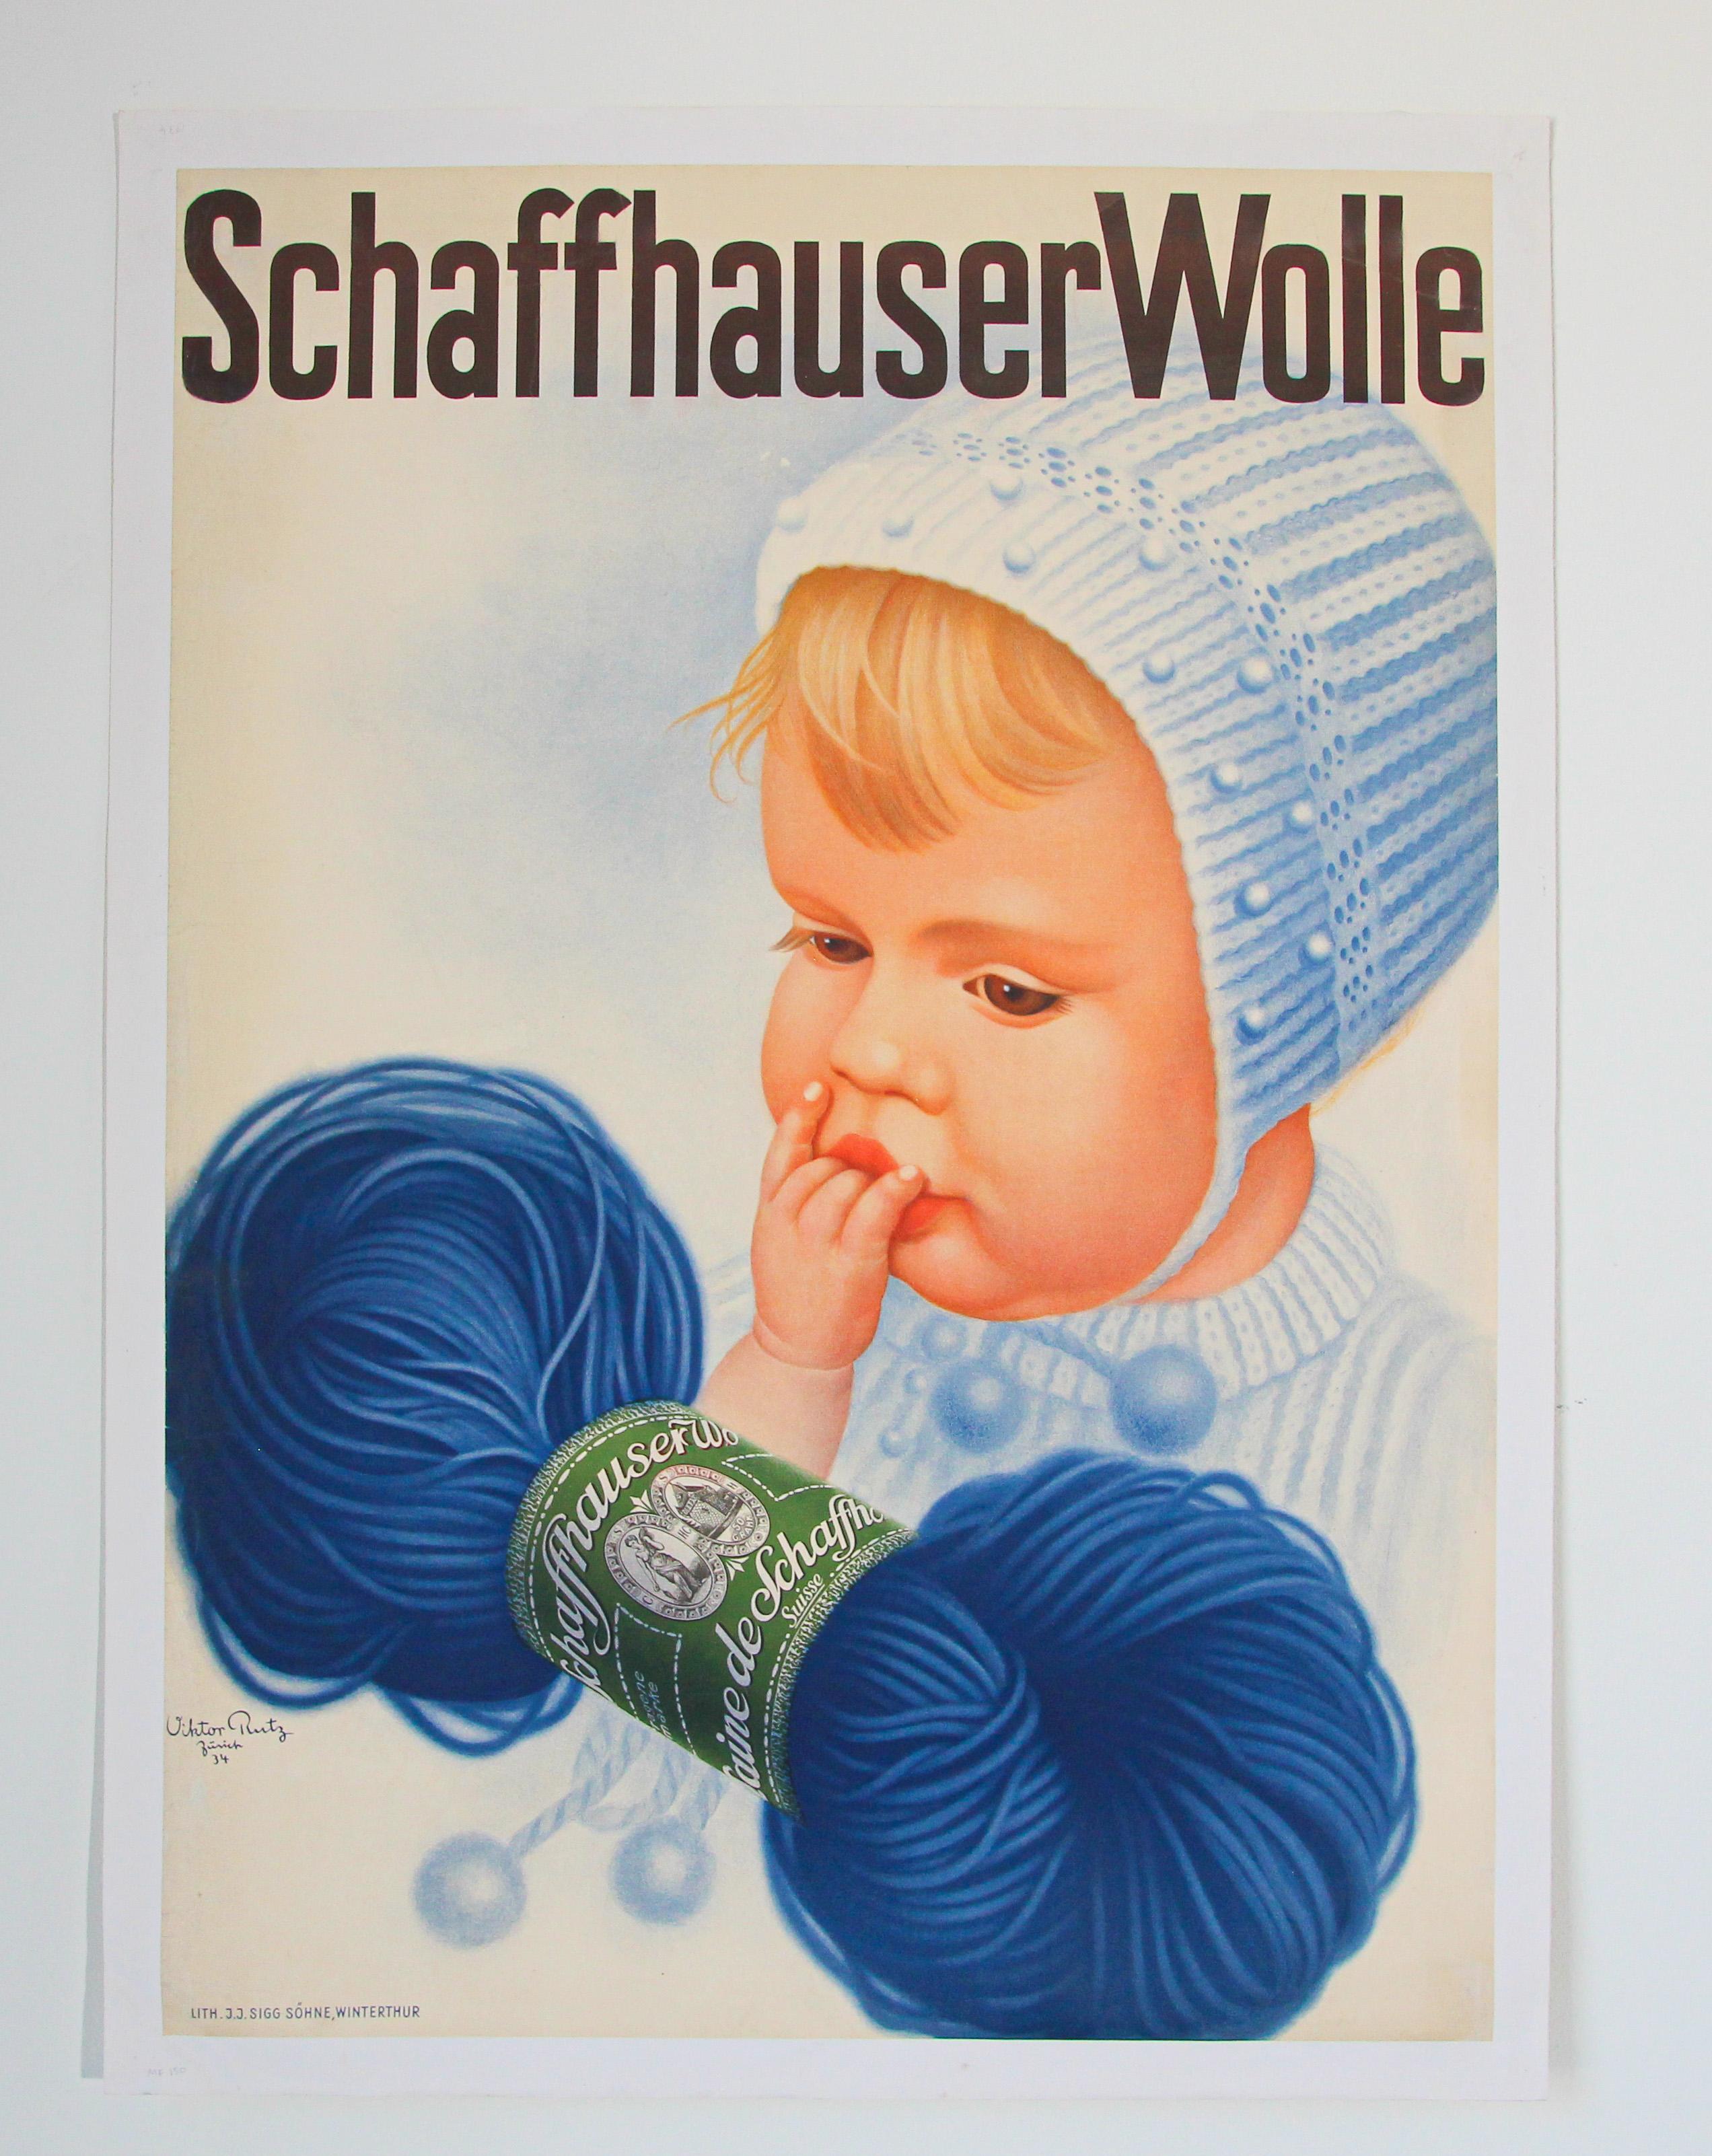 Original Vintage Poster Swiss Schaffhauser Wolle Wool Yarn Knitting 1935 Baby.
This is an original 1st printing of this poster by Viktor Rutz Zurich.
Printed in 1935, it was created to advertise Schaffhauser Wolle.
Advertising poster for yarn